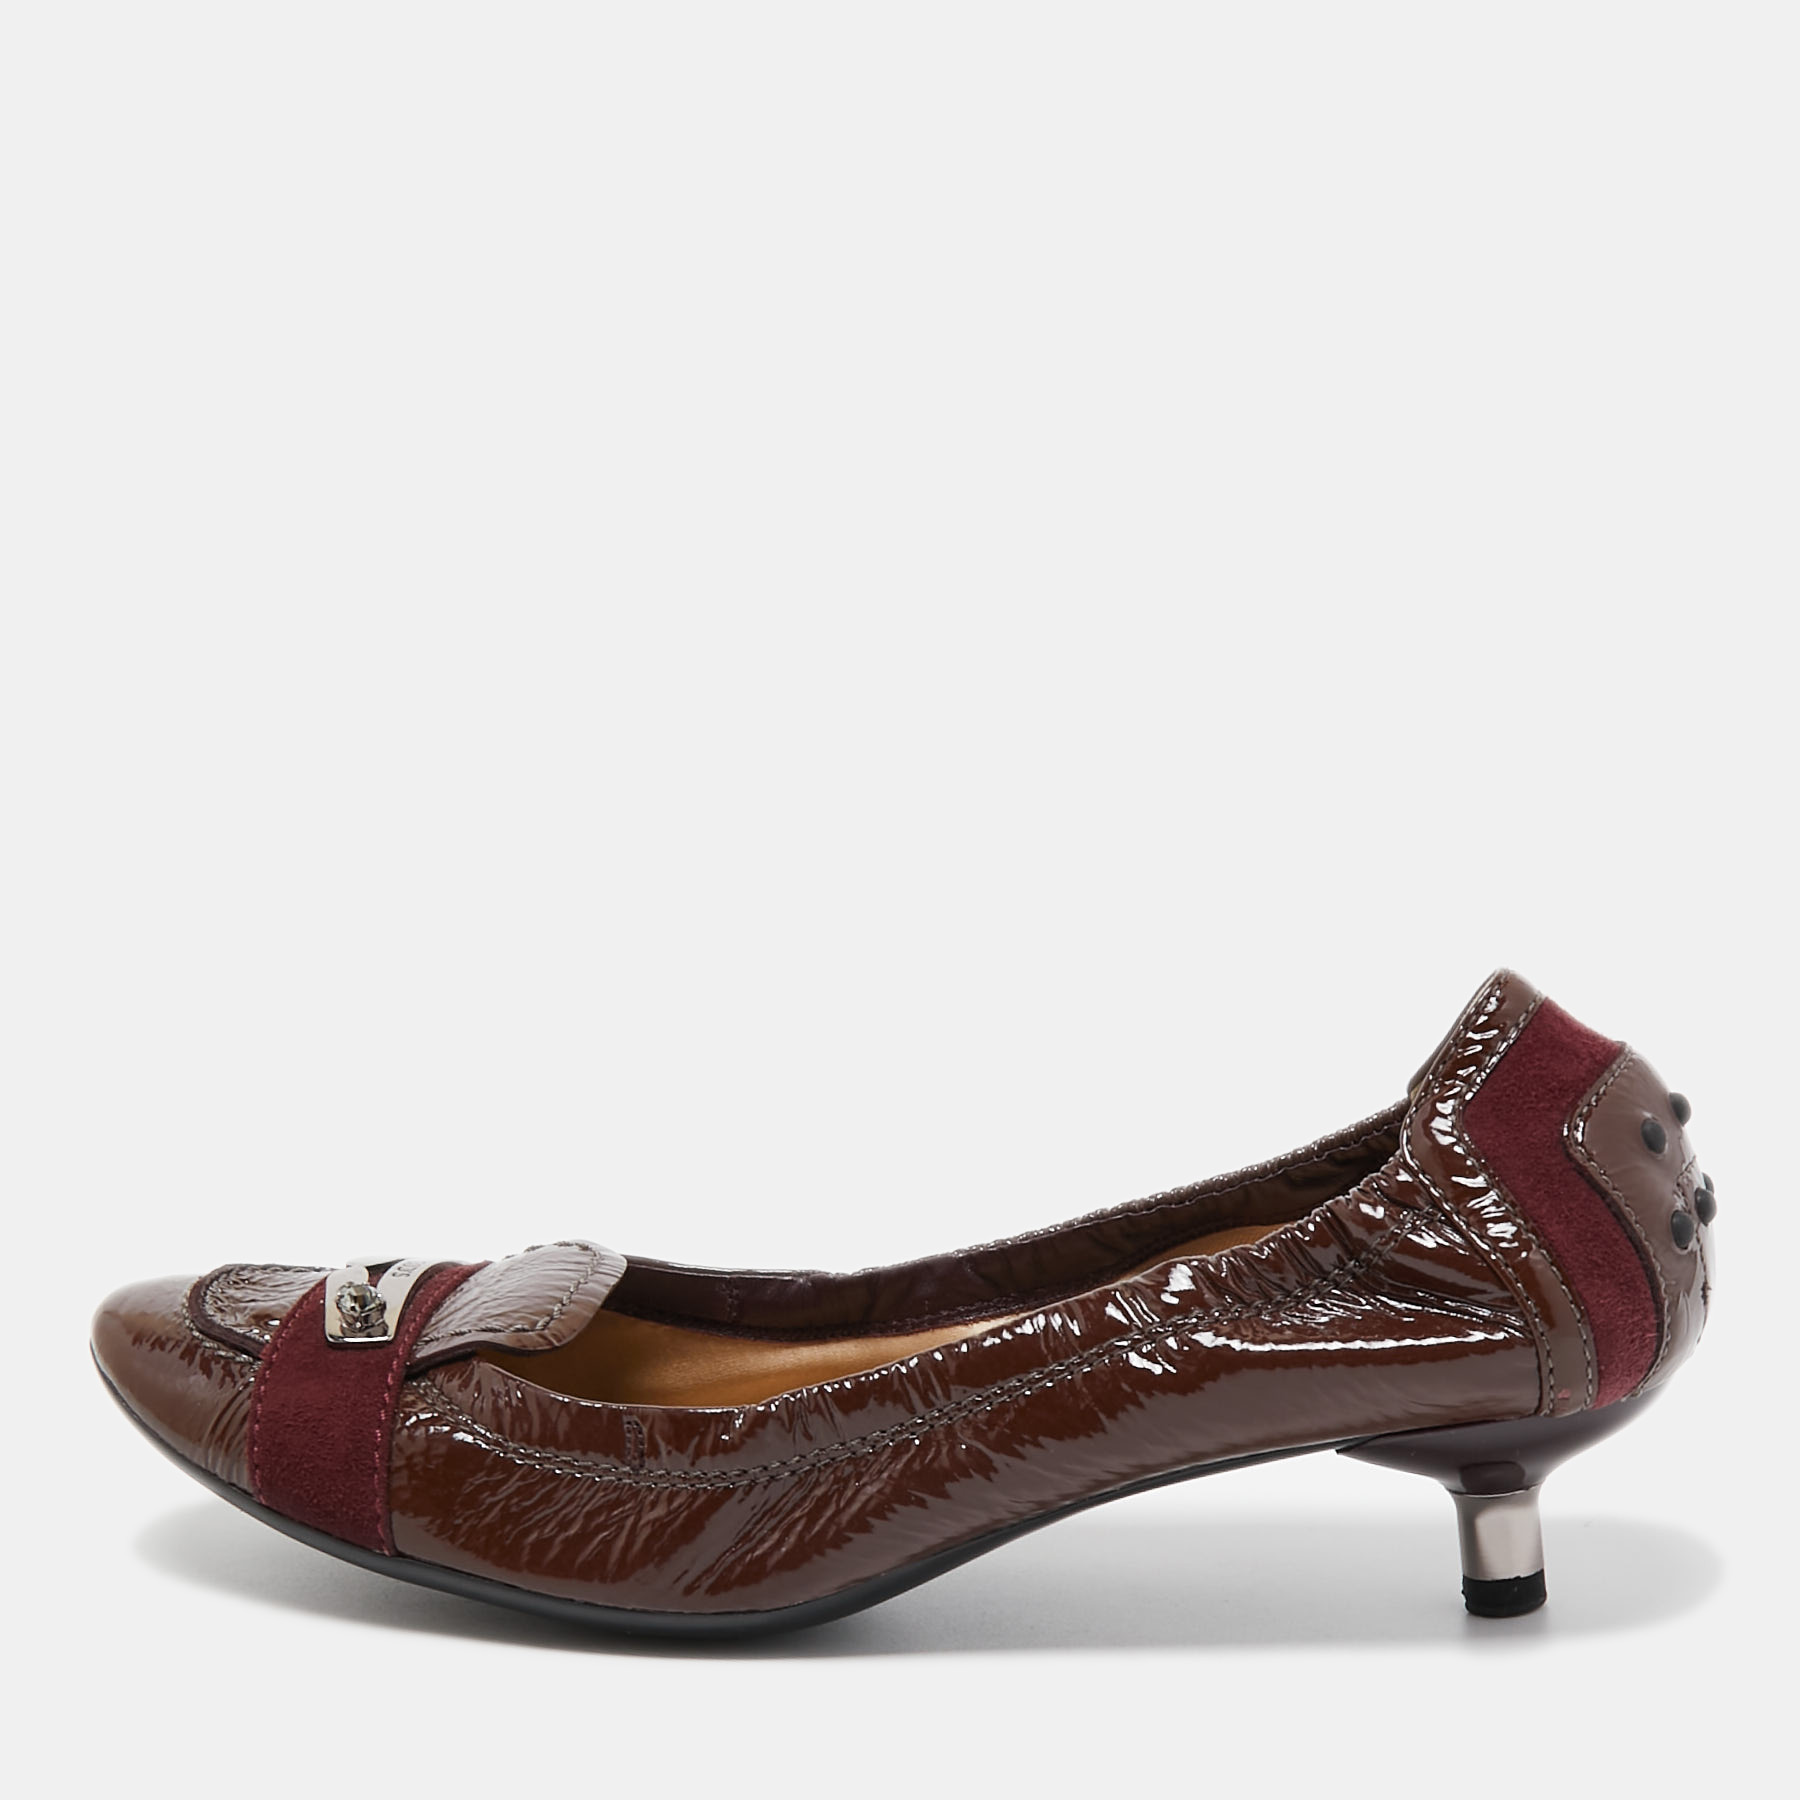 Tod's Brown/Burgundy Patent Leather And Suede Scrunch Loafer Pumps Size 37